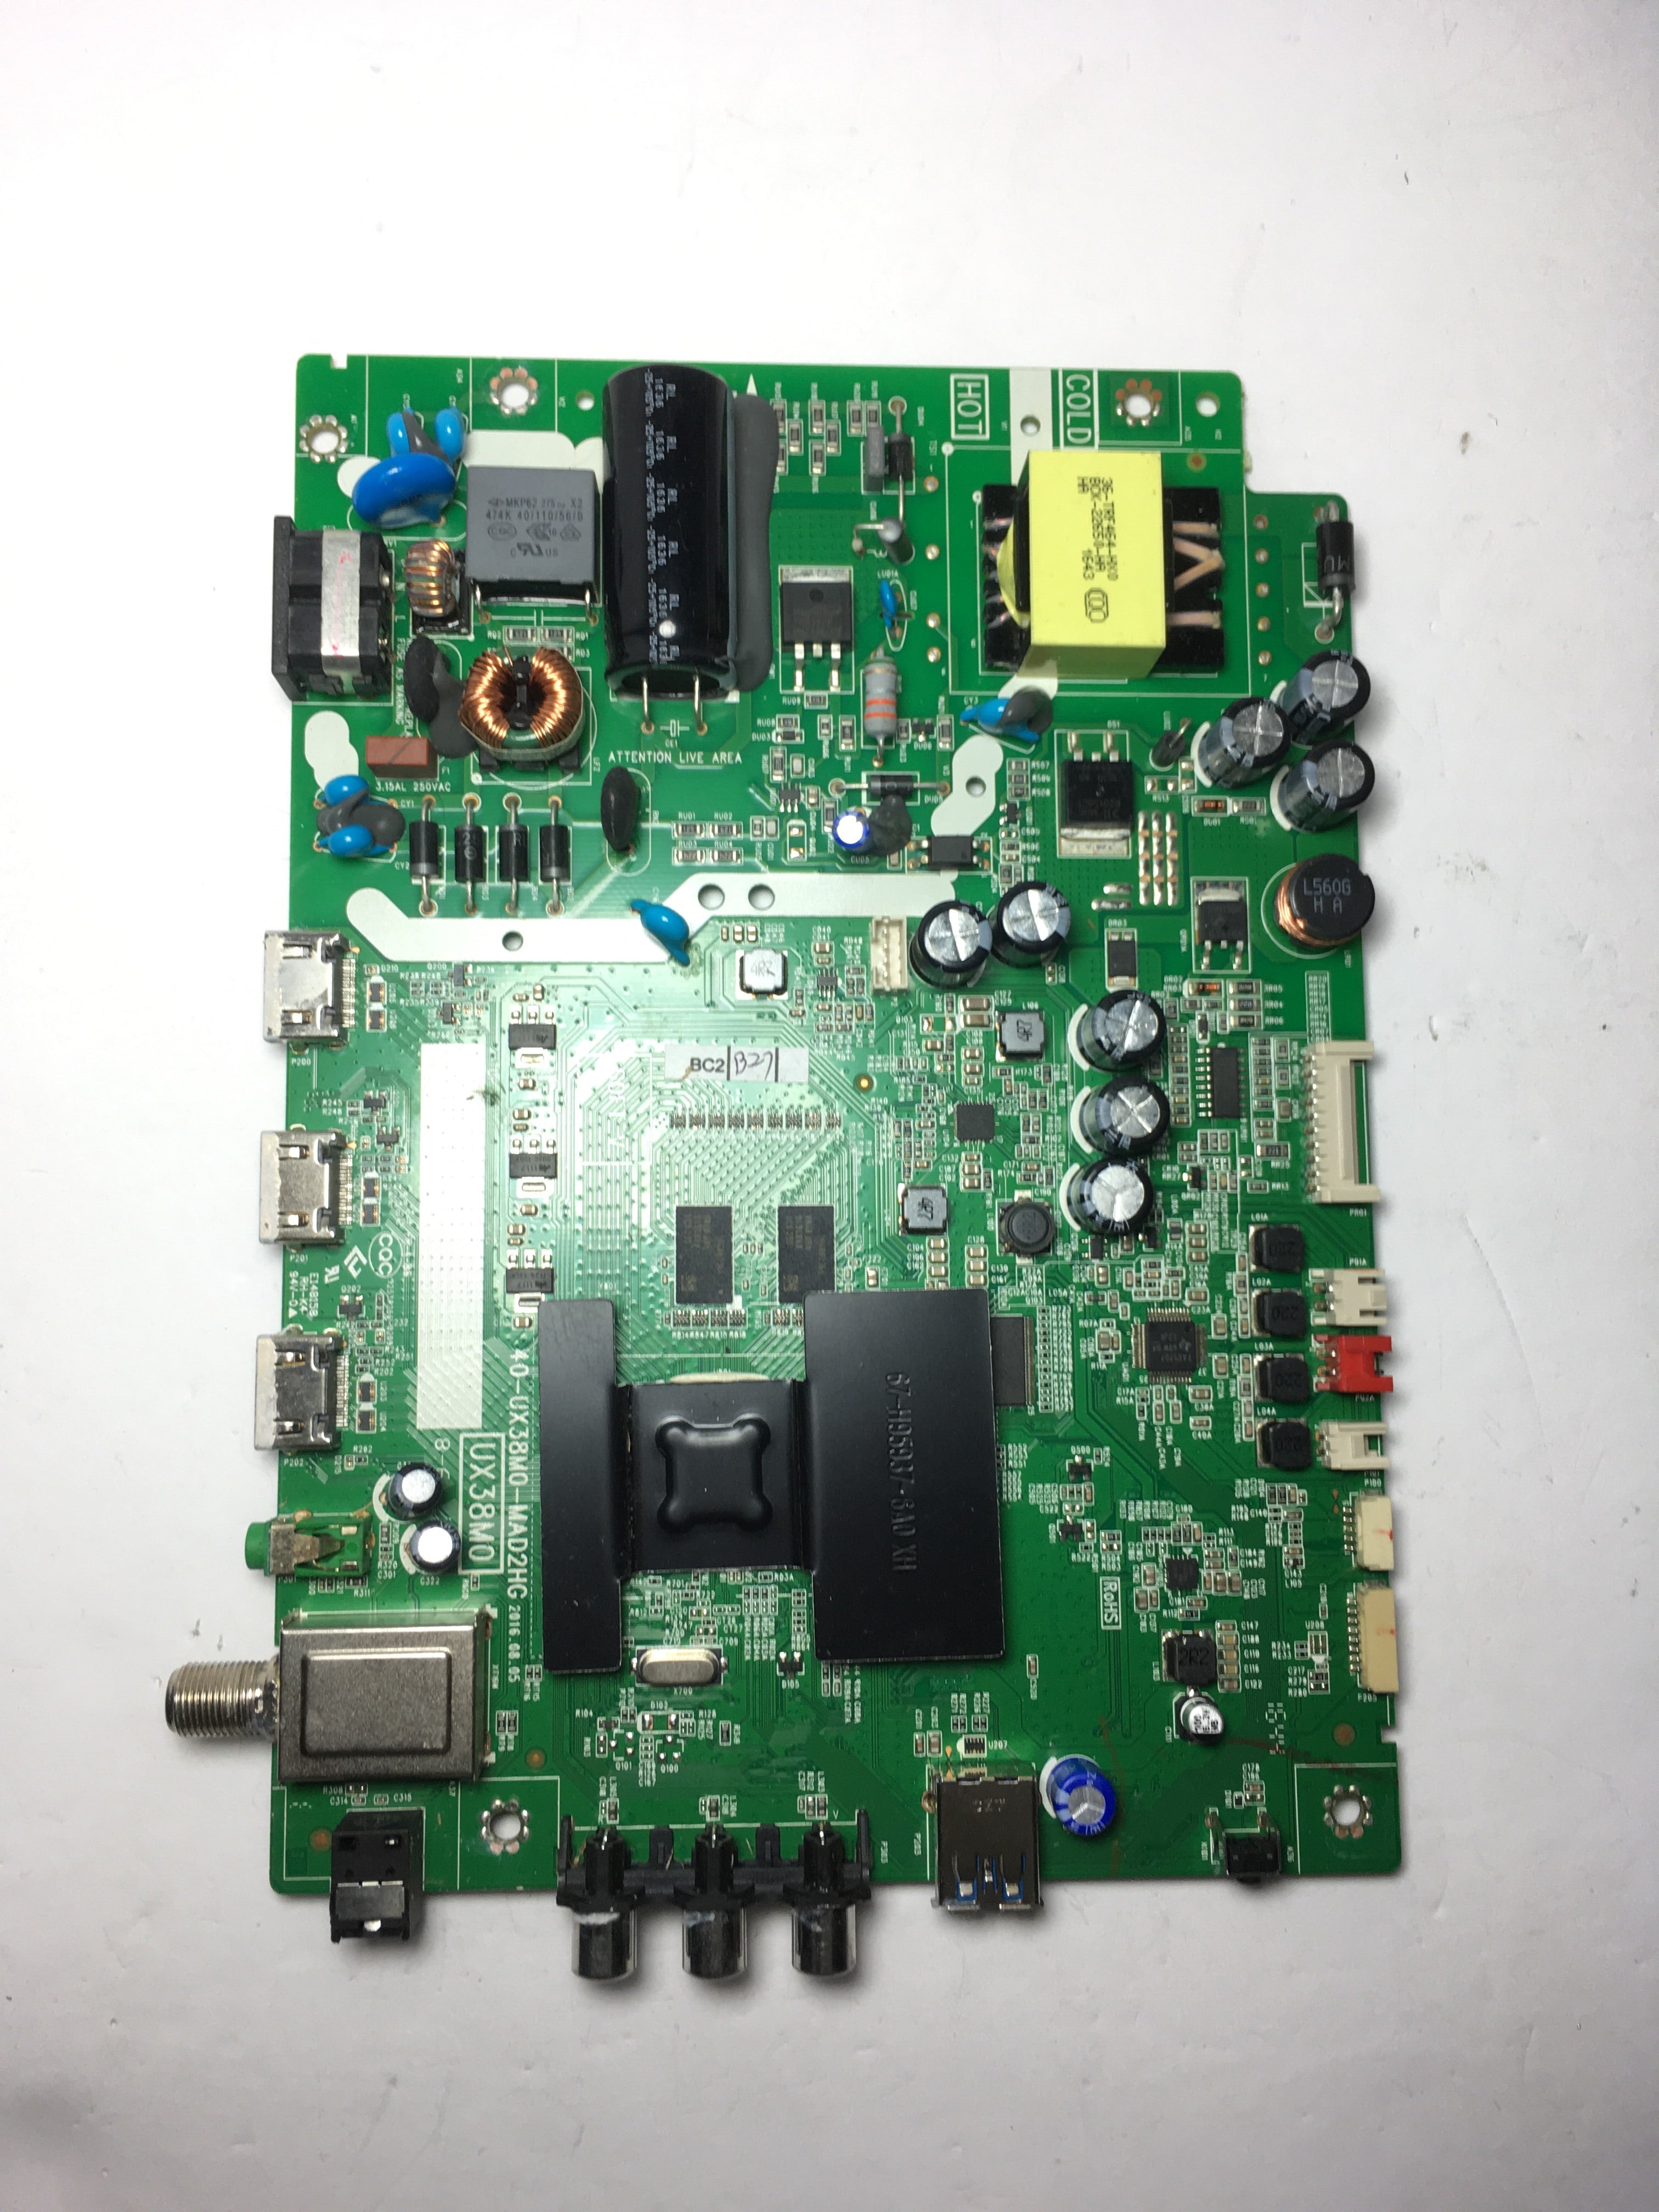 TCL T8-32NAZP-MA4 Main Board / Power Supply for 32S3750 (32S3750TAHAA or 32S3750TAGAA Version)